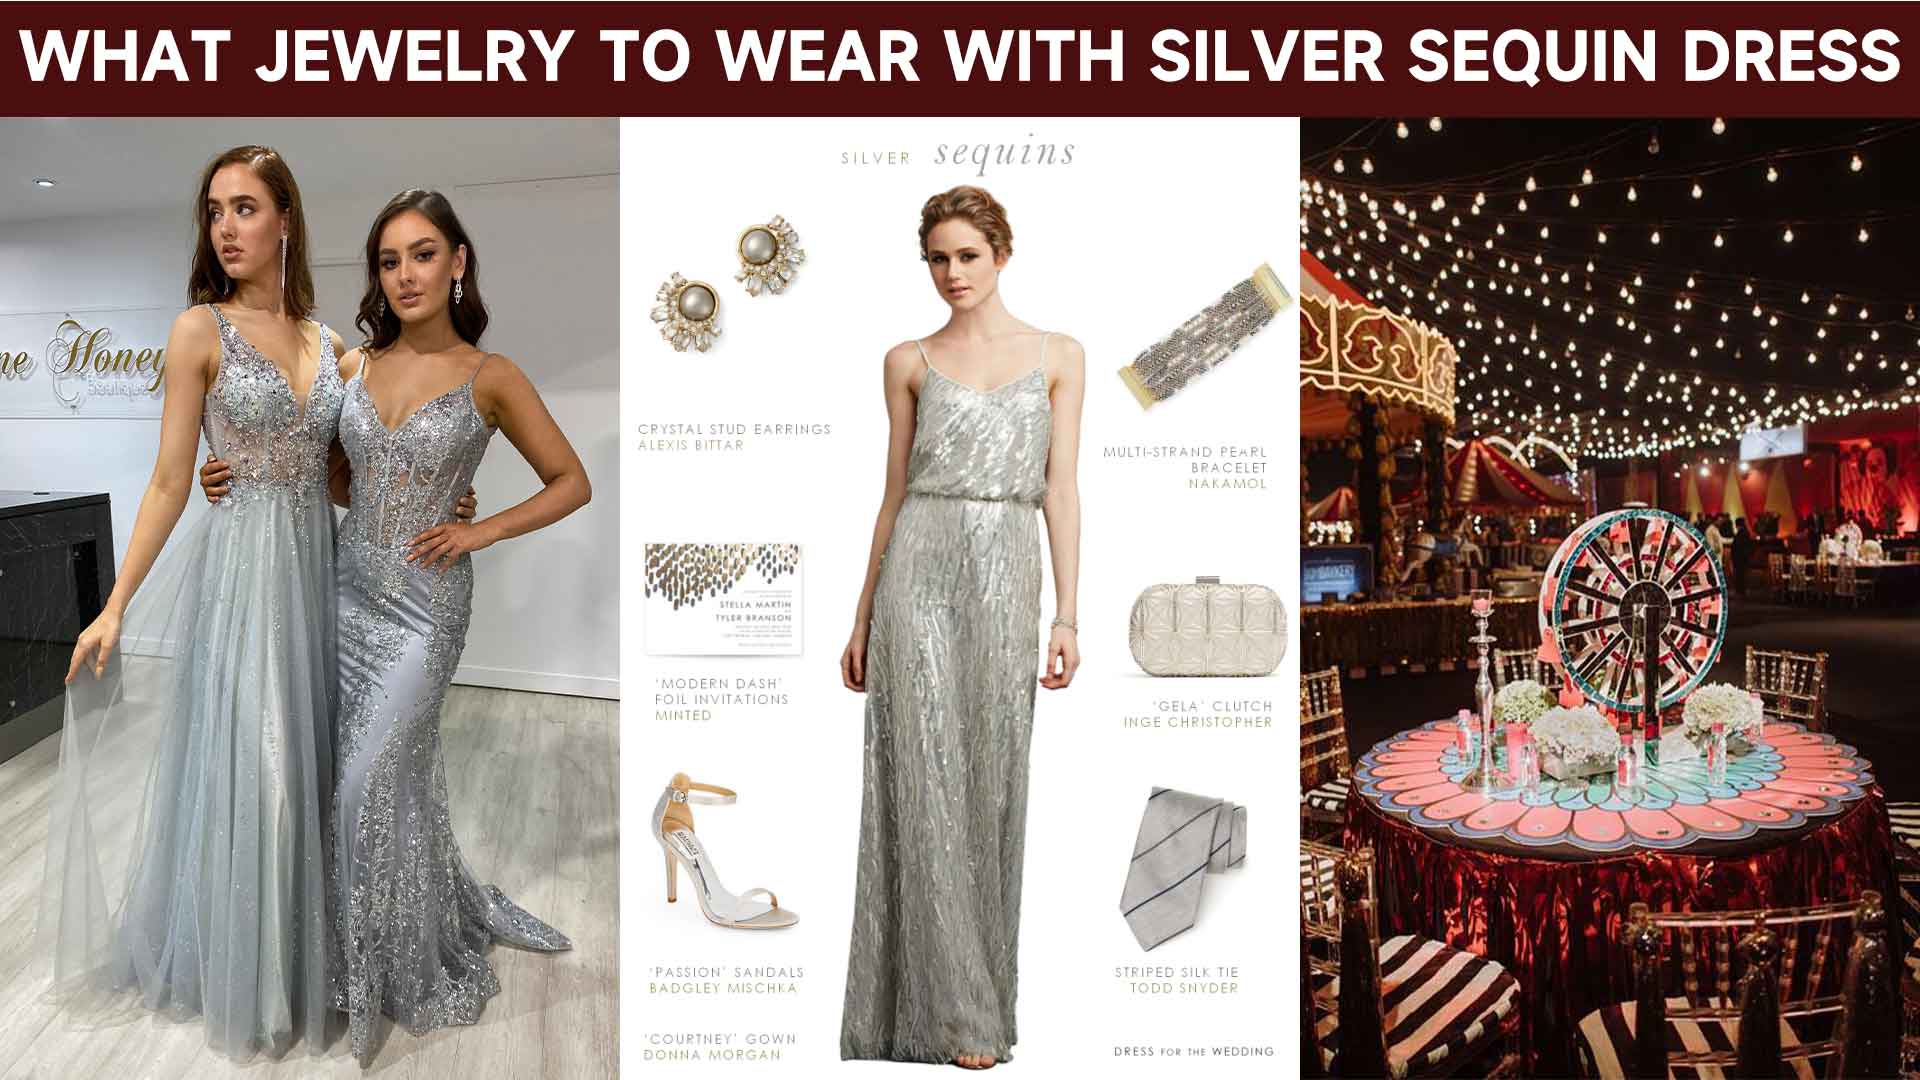 What Jewelry To Wear With Silver Sequin Dress？